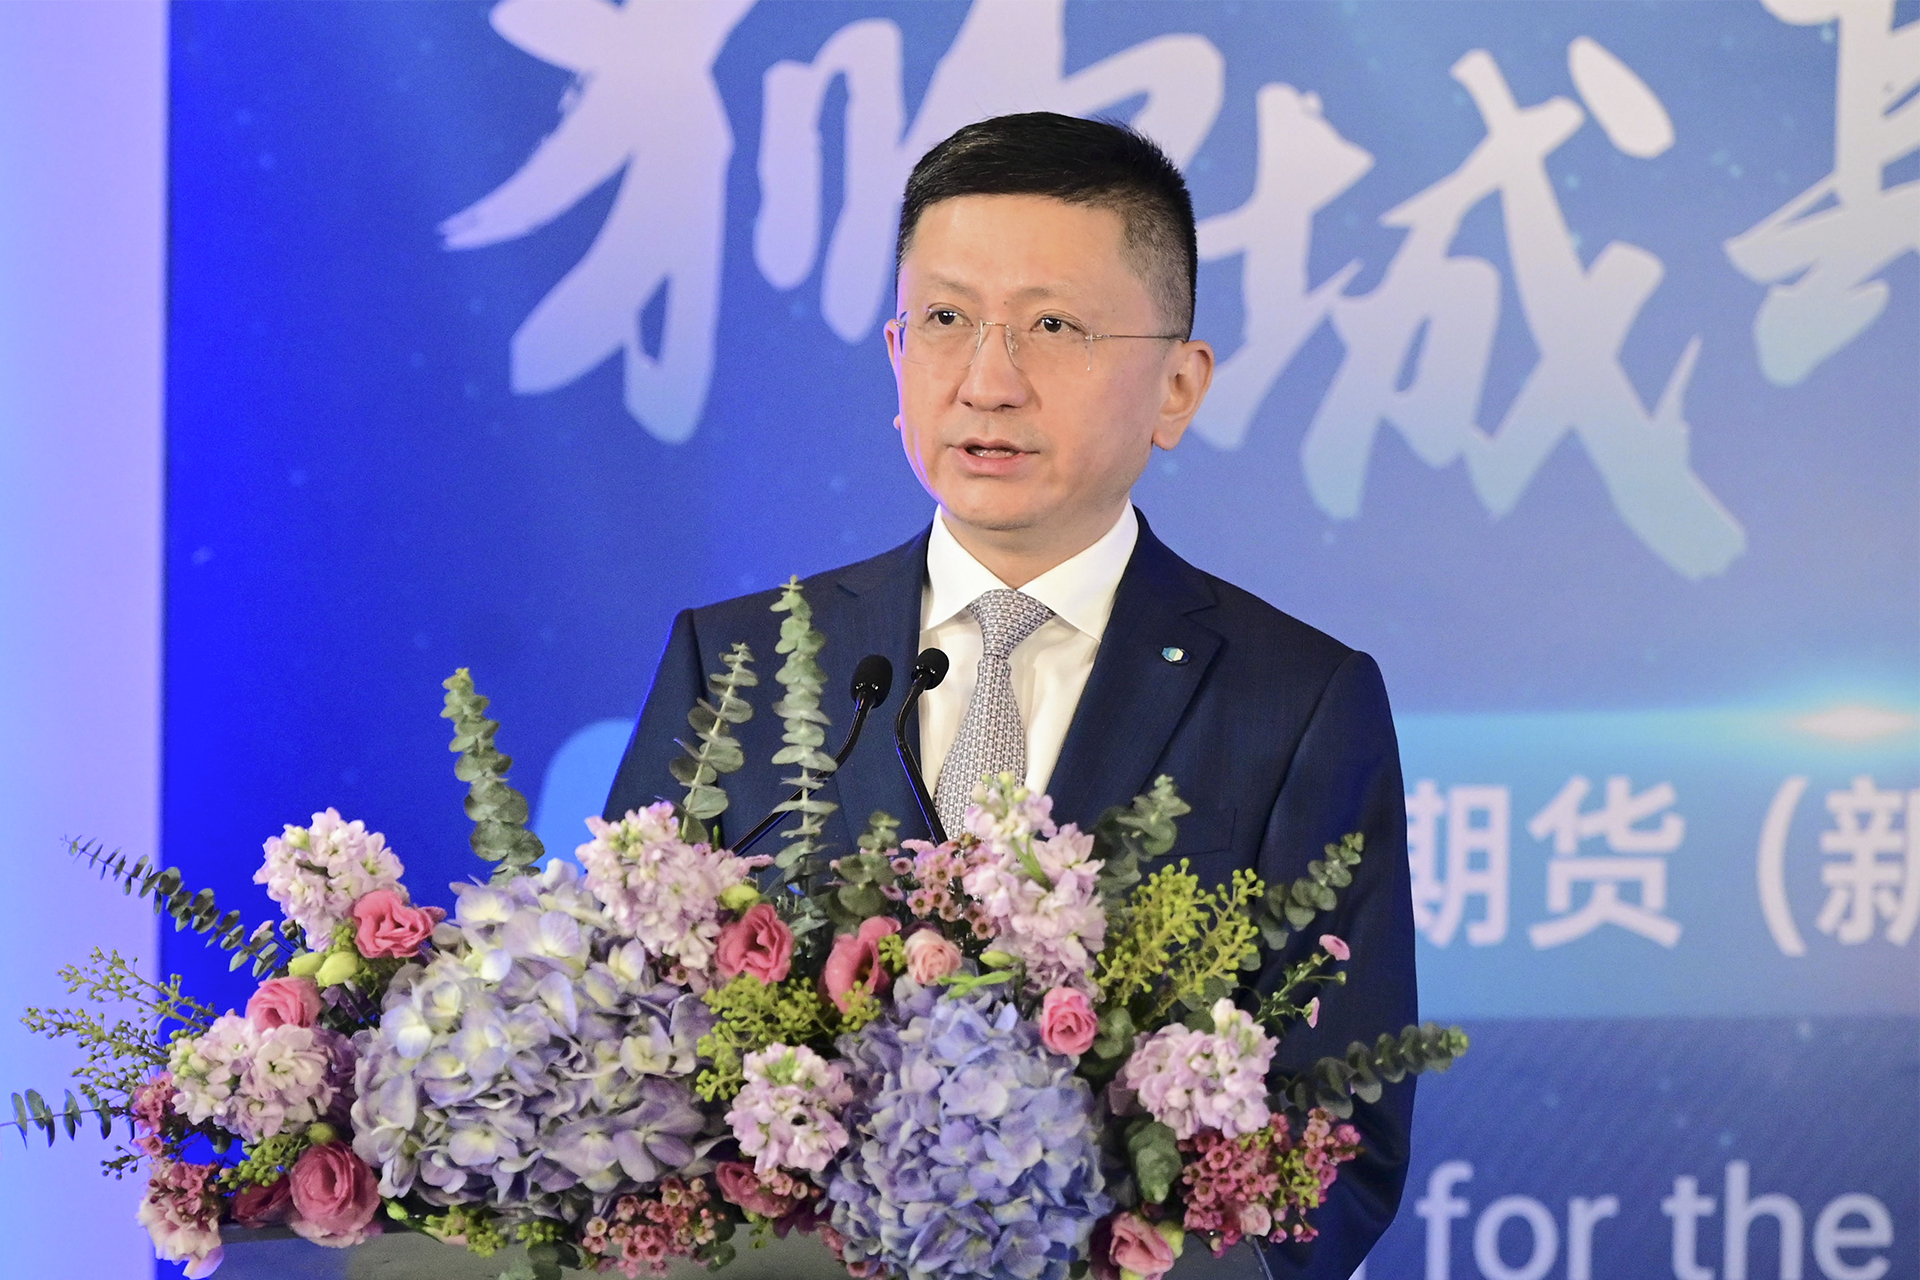 Guotai Junan Futures Singapore Co., Ltd. started its business operation and signed strategic cooperation with Bank of China Singapore Branch and Shengbao Bank ...686 / author:Guotai Jun'an / source:Guotai Jun'an